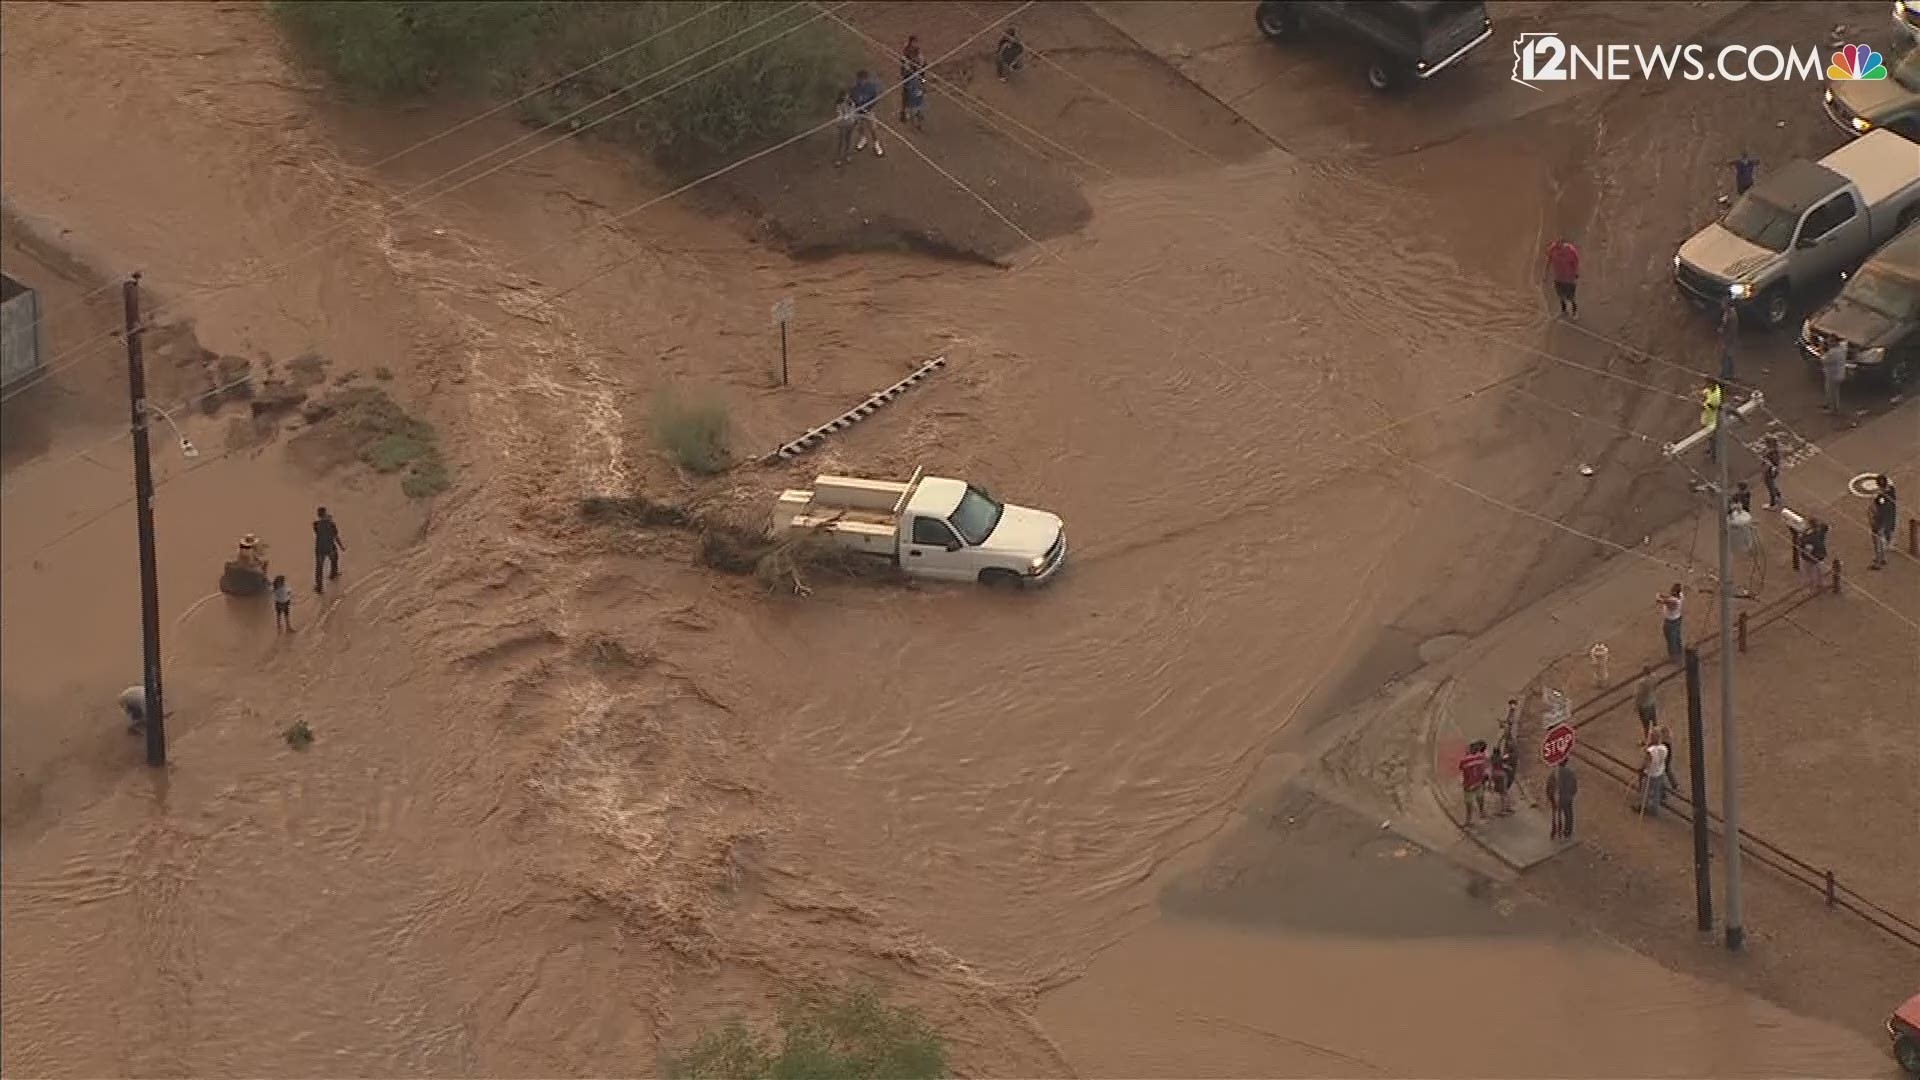 Two trucks were hauled out of flooded washes after the drivers were rescued near 11th Street and Dunlap Avenue.